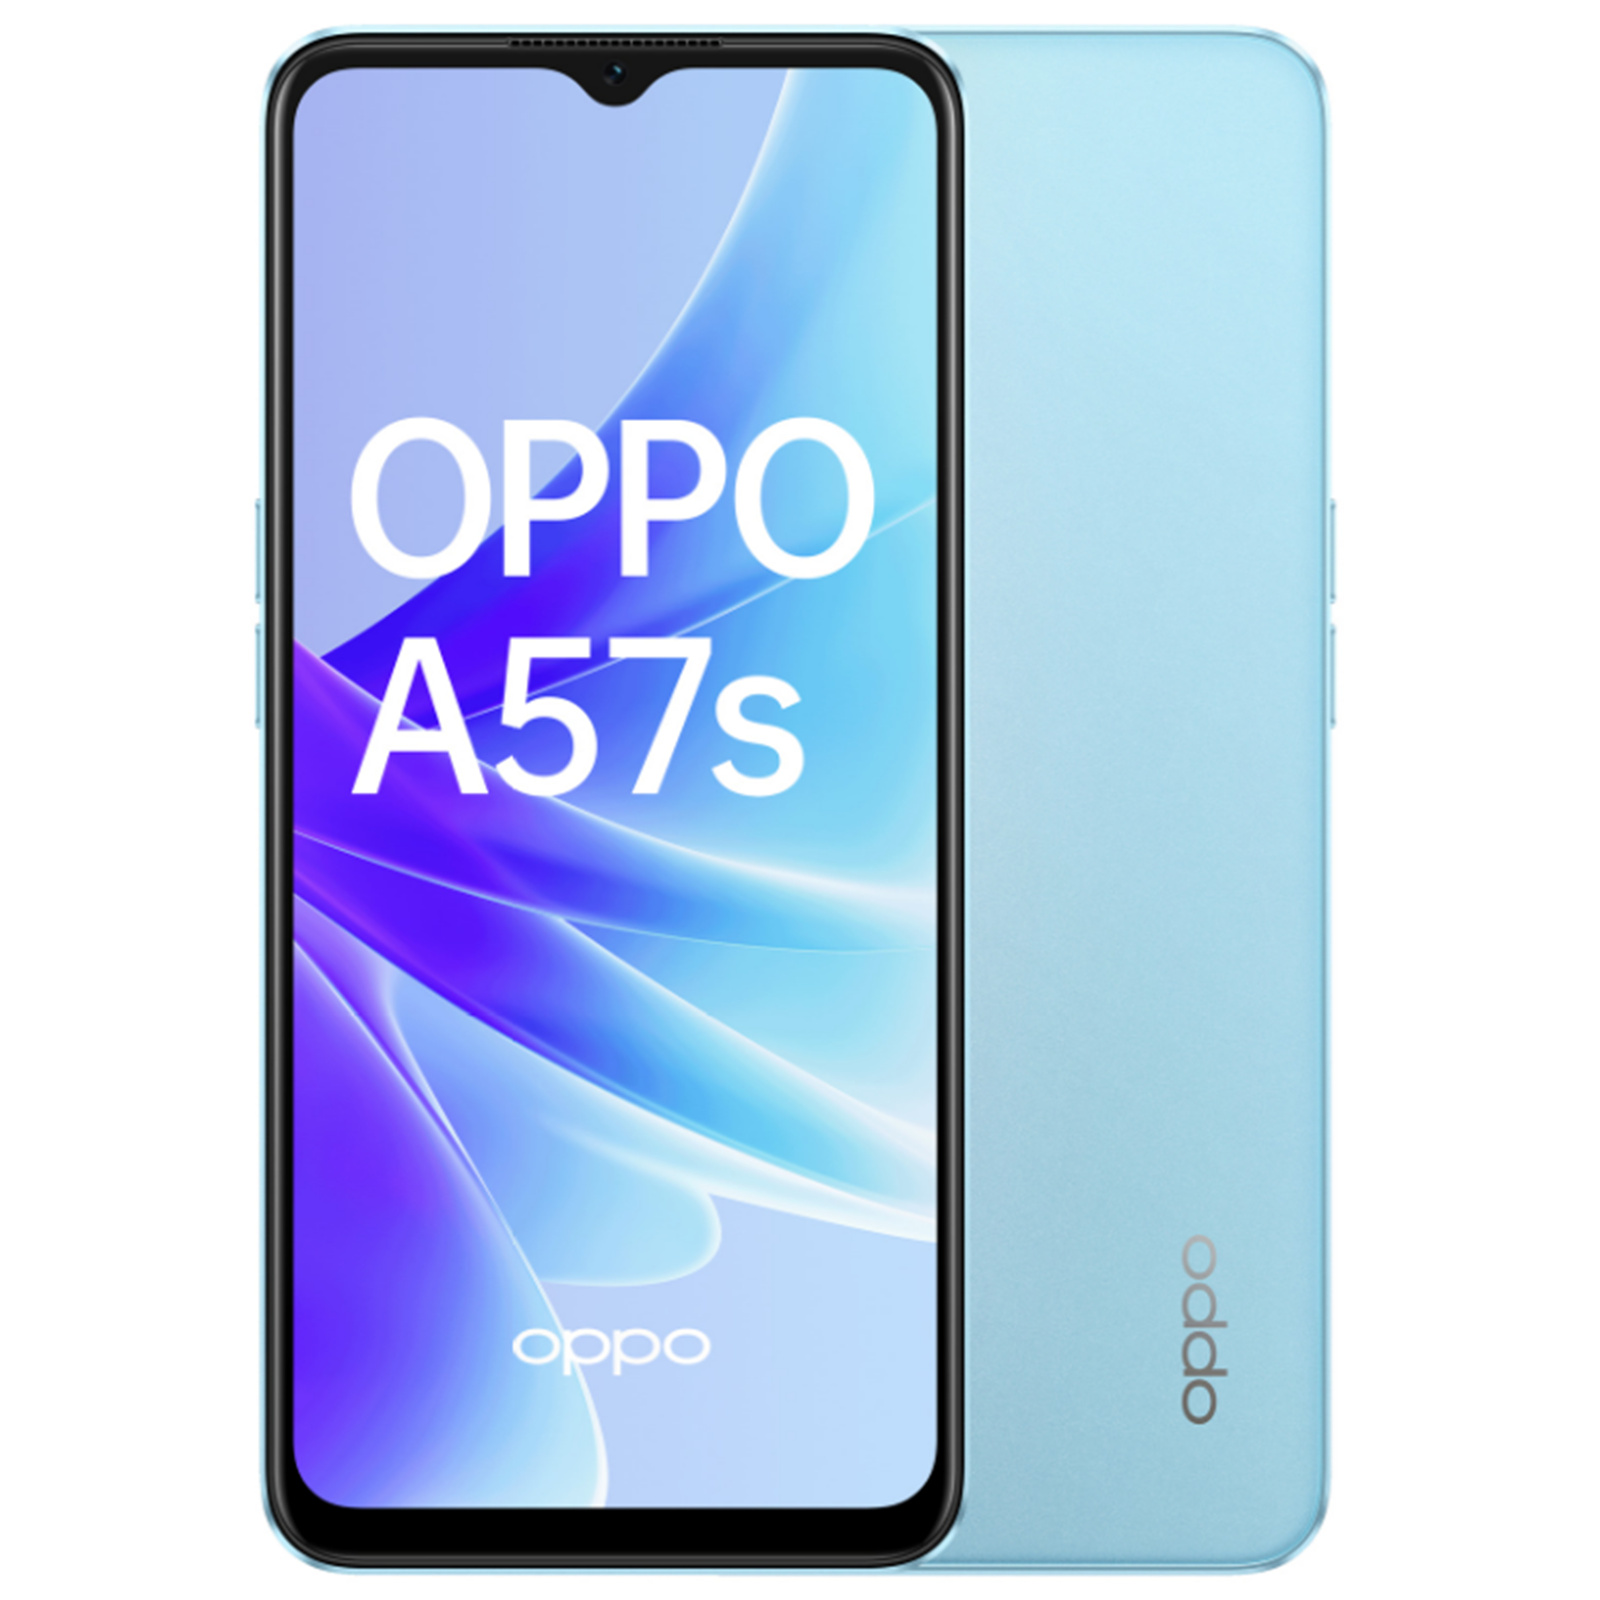 Oppo A57s CPH2385 technical specifications 